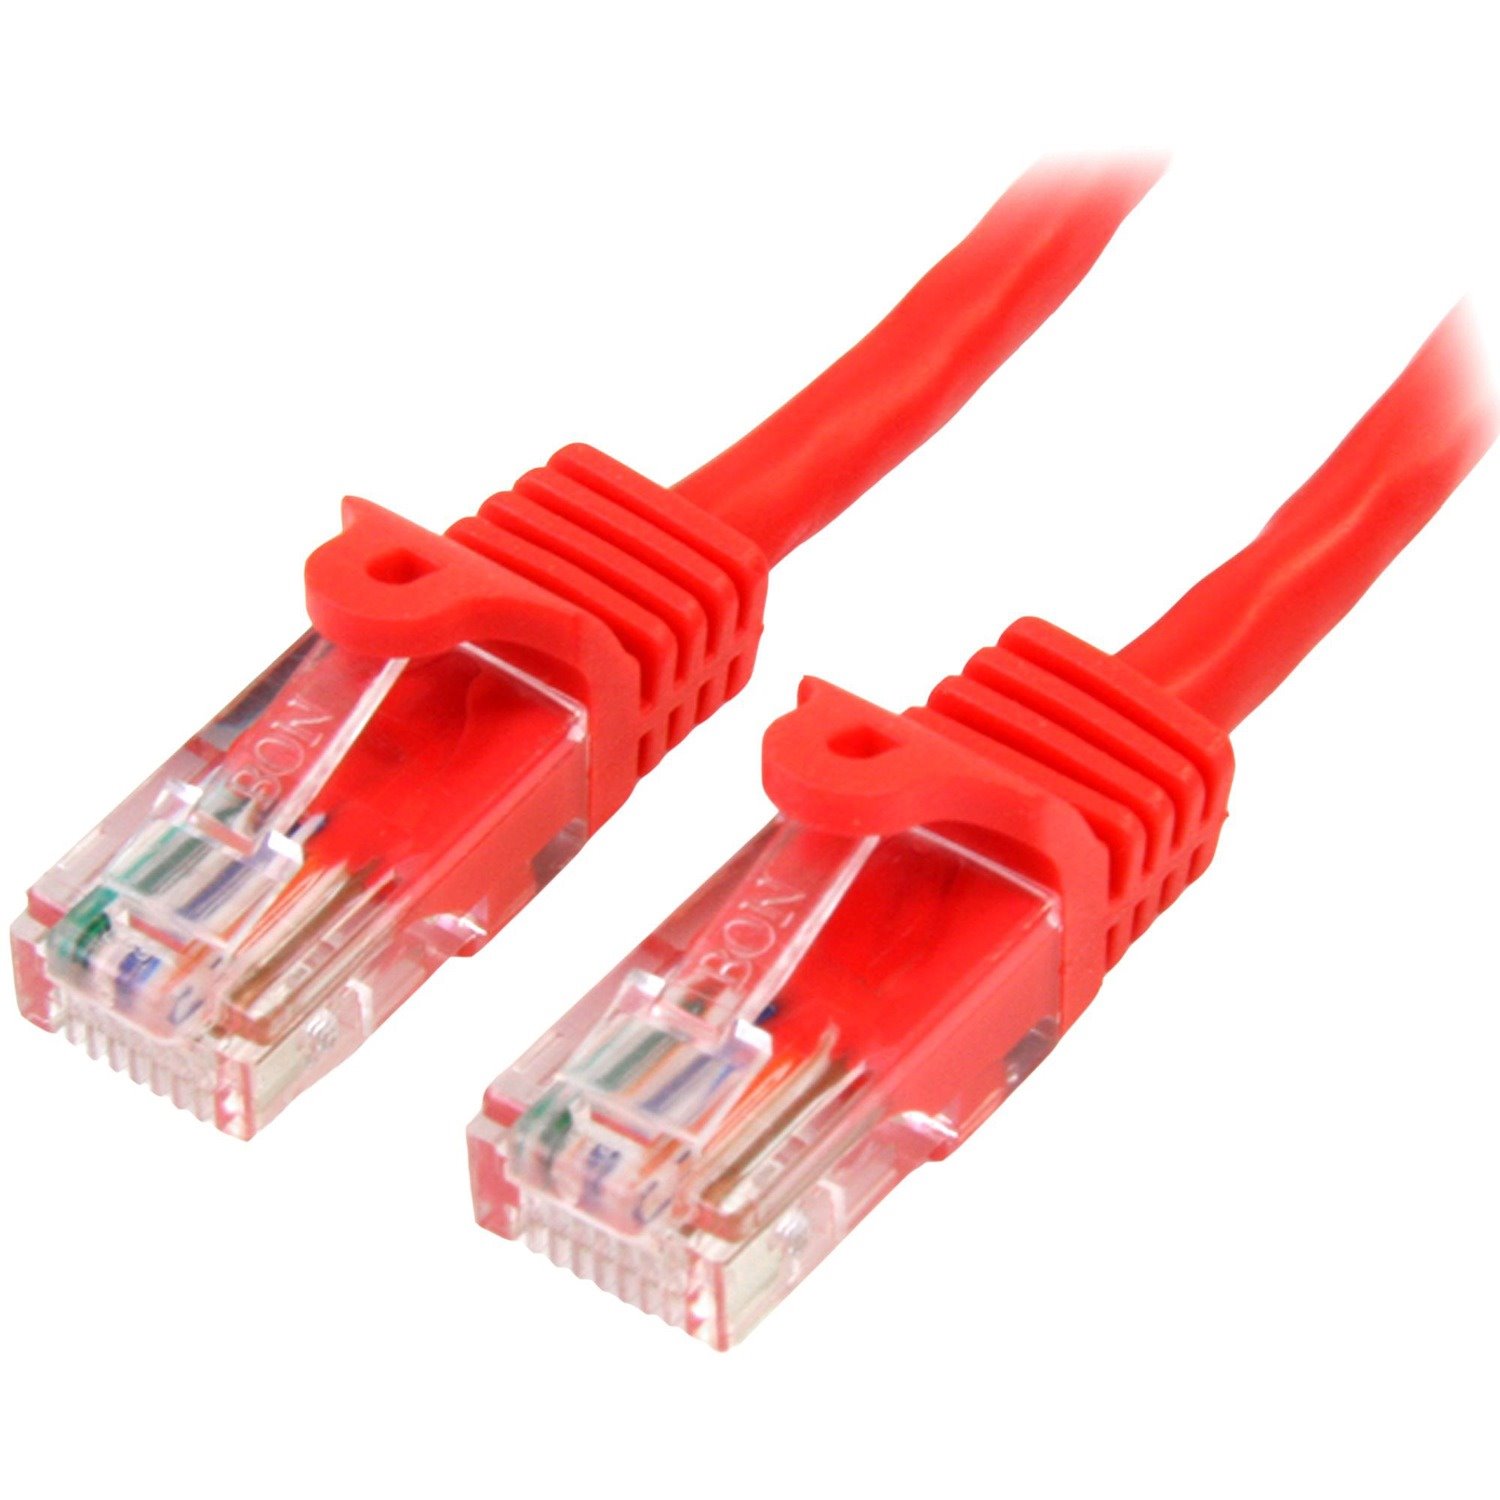 StarTech.com 3 m Red Cat5e Snagless RJ45 UTP Patch Cable - 3m Patch Cord - Ethernet Patch Cable - RJ45 Male to Male Cat 5e Cable